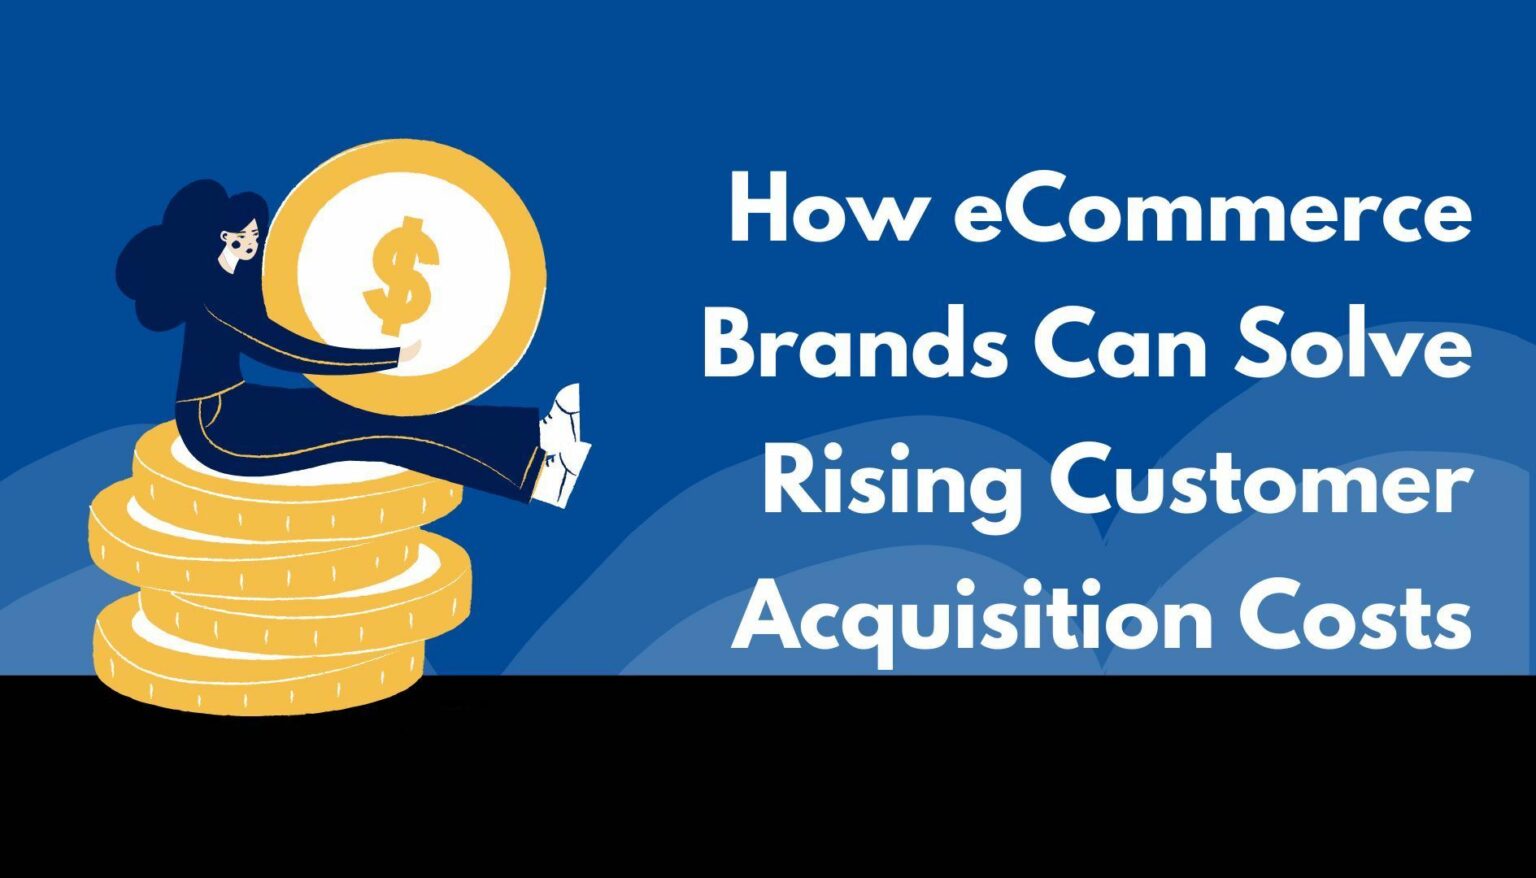 How eCommerce Brands Can Solve Rising Customer Acquisition Costs